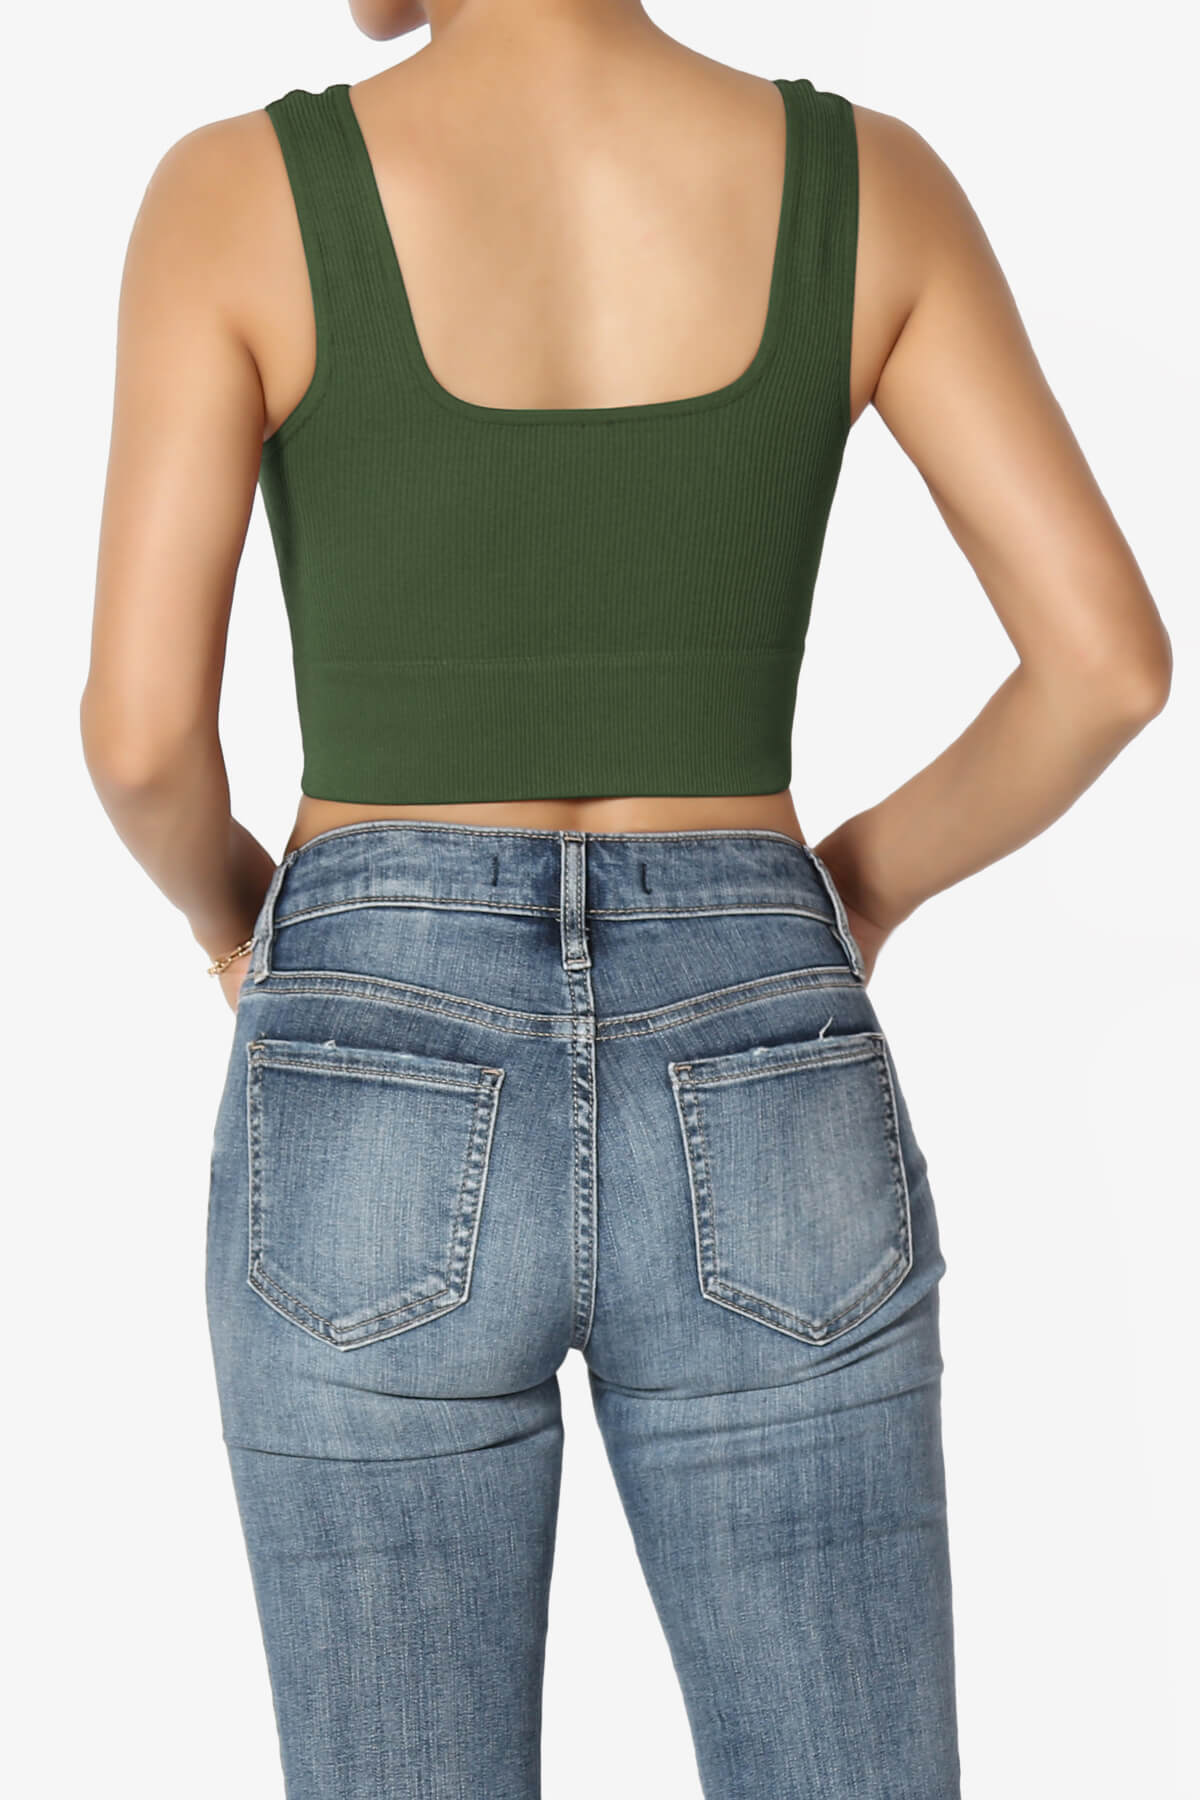 Hilde Ripped Seamless Square Neck Crop Tank Top ARMY GREEN_2